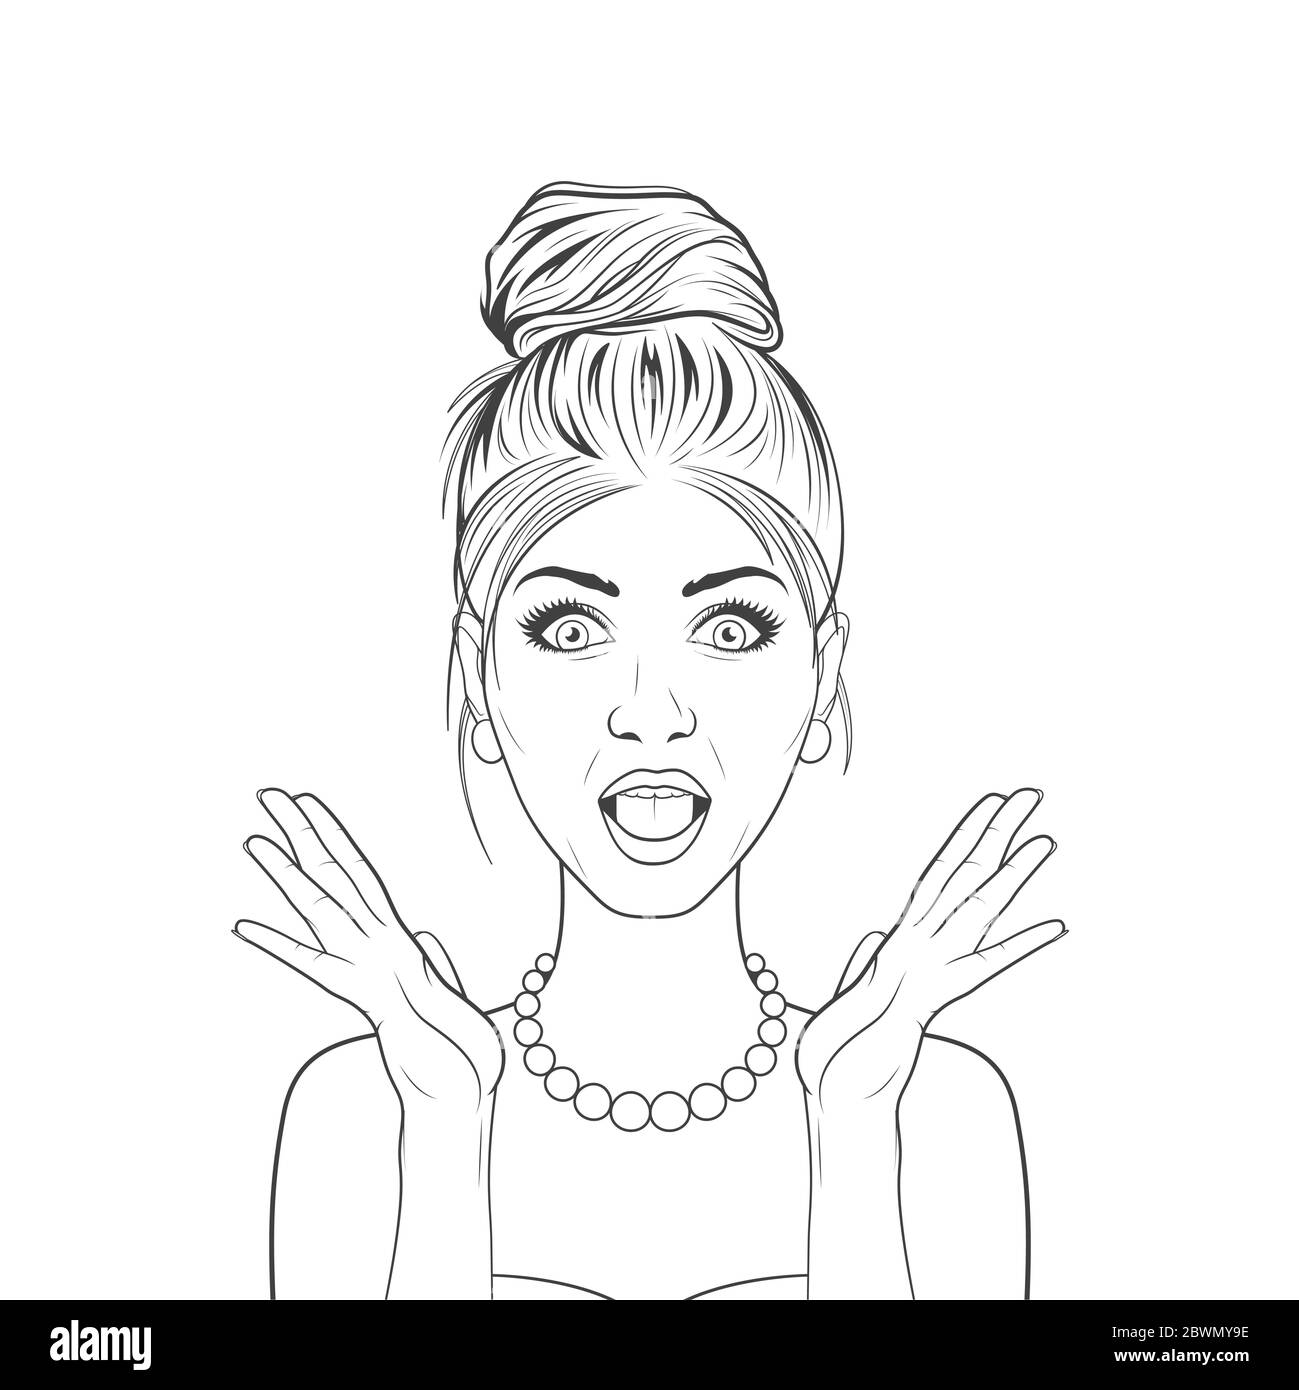 Pop art woman Black and White Stock Photos & Images - Alamy